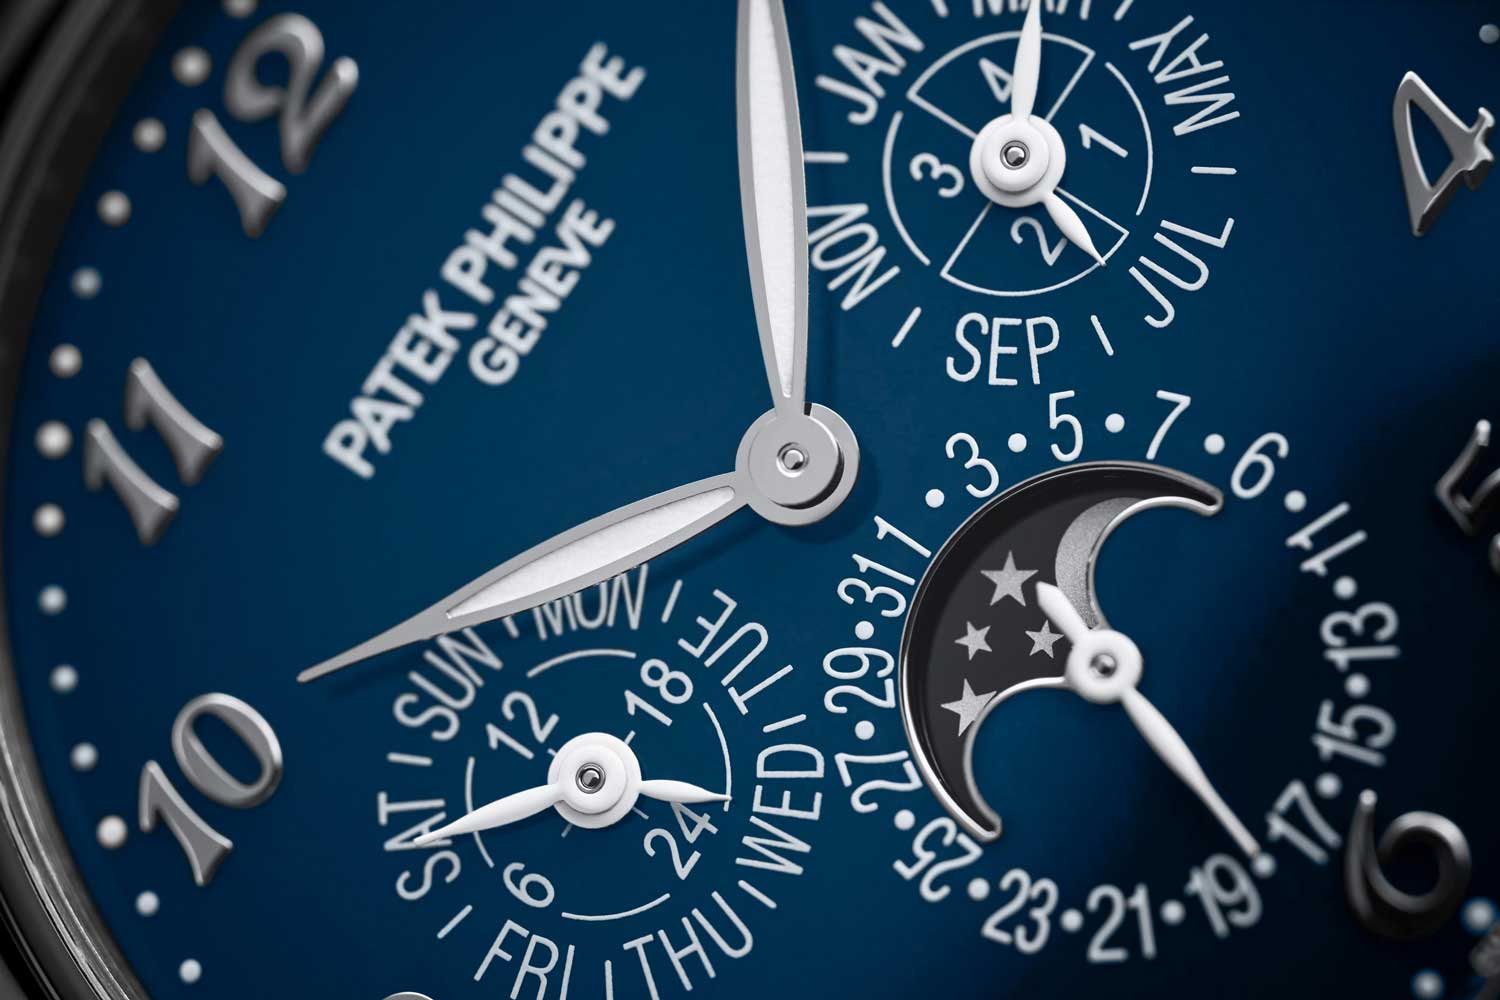 The deep blue grand feu enamel dial is a wonderful expression of Patek Philippe's restrained classicism, with applied Breguet-style numerals and a traditional perpetual layout with a moonphase at six